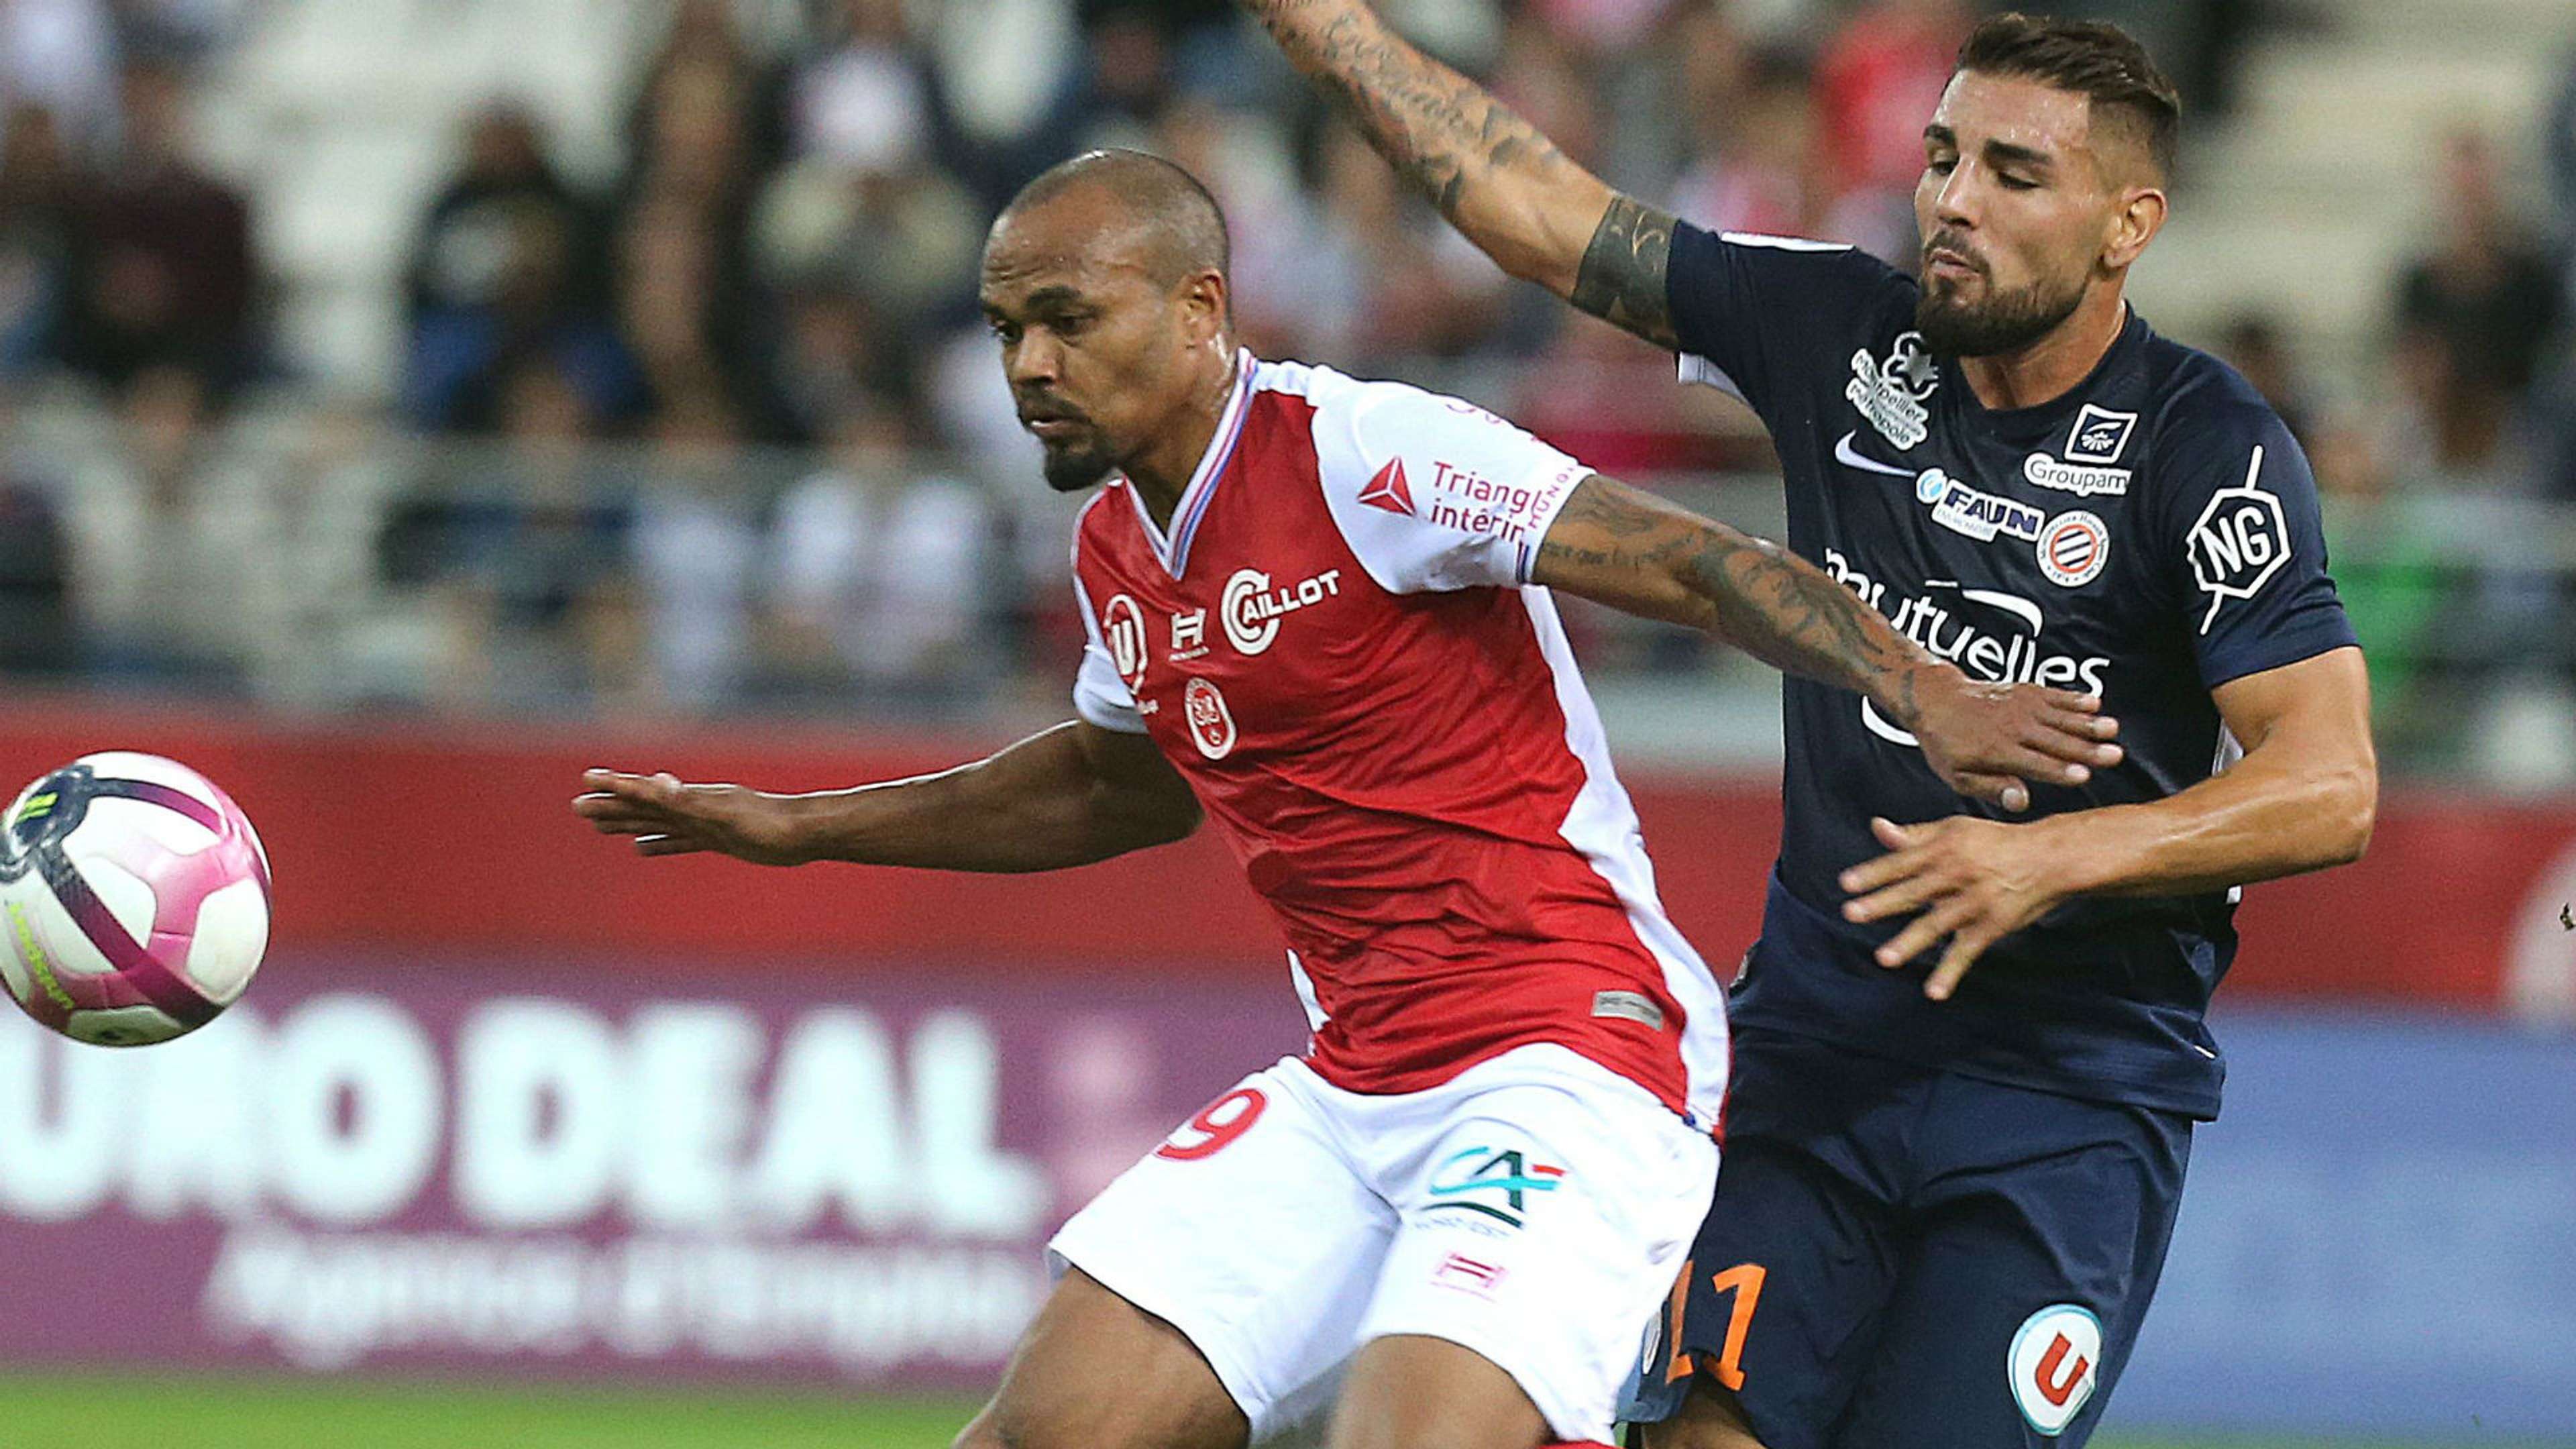 Thomas Fontaine Andy Delort Reims Montpellier Ligue 1 01092018